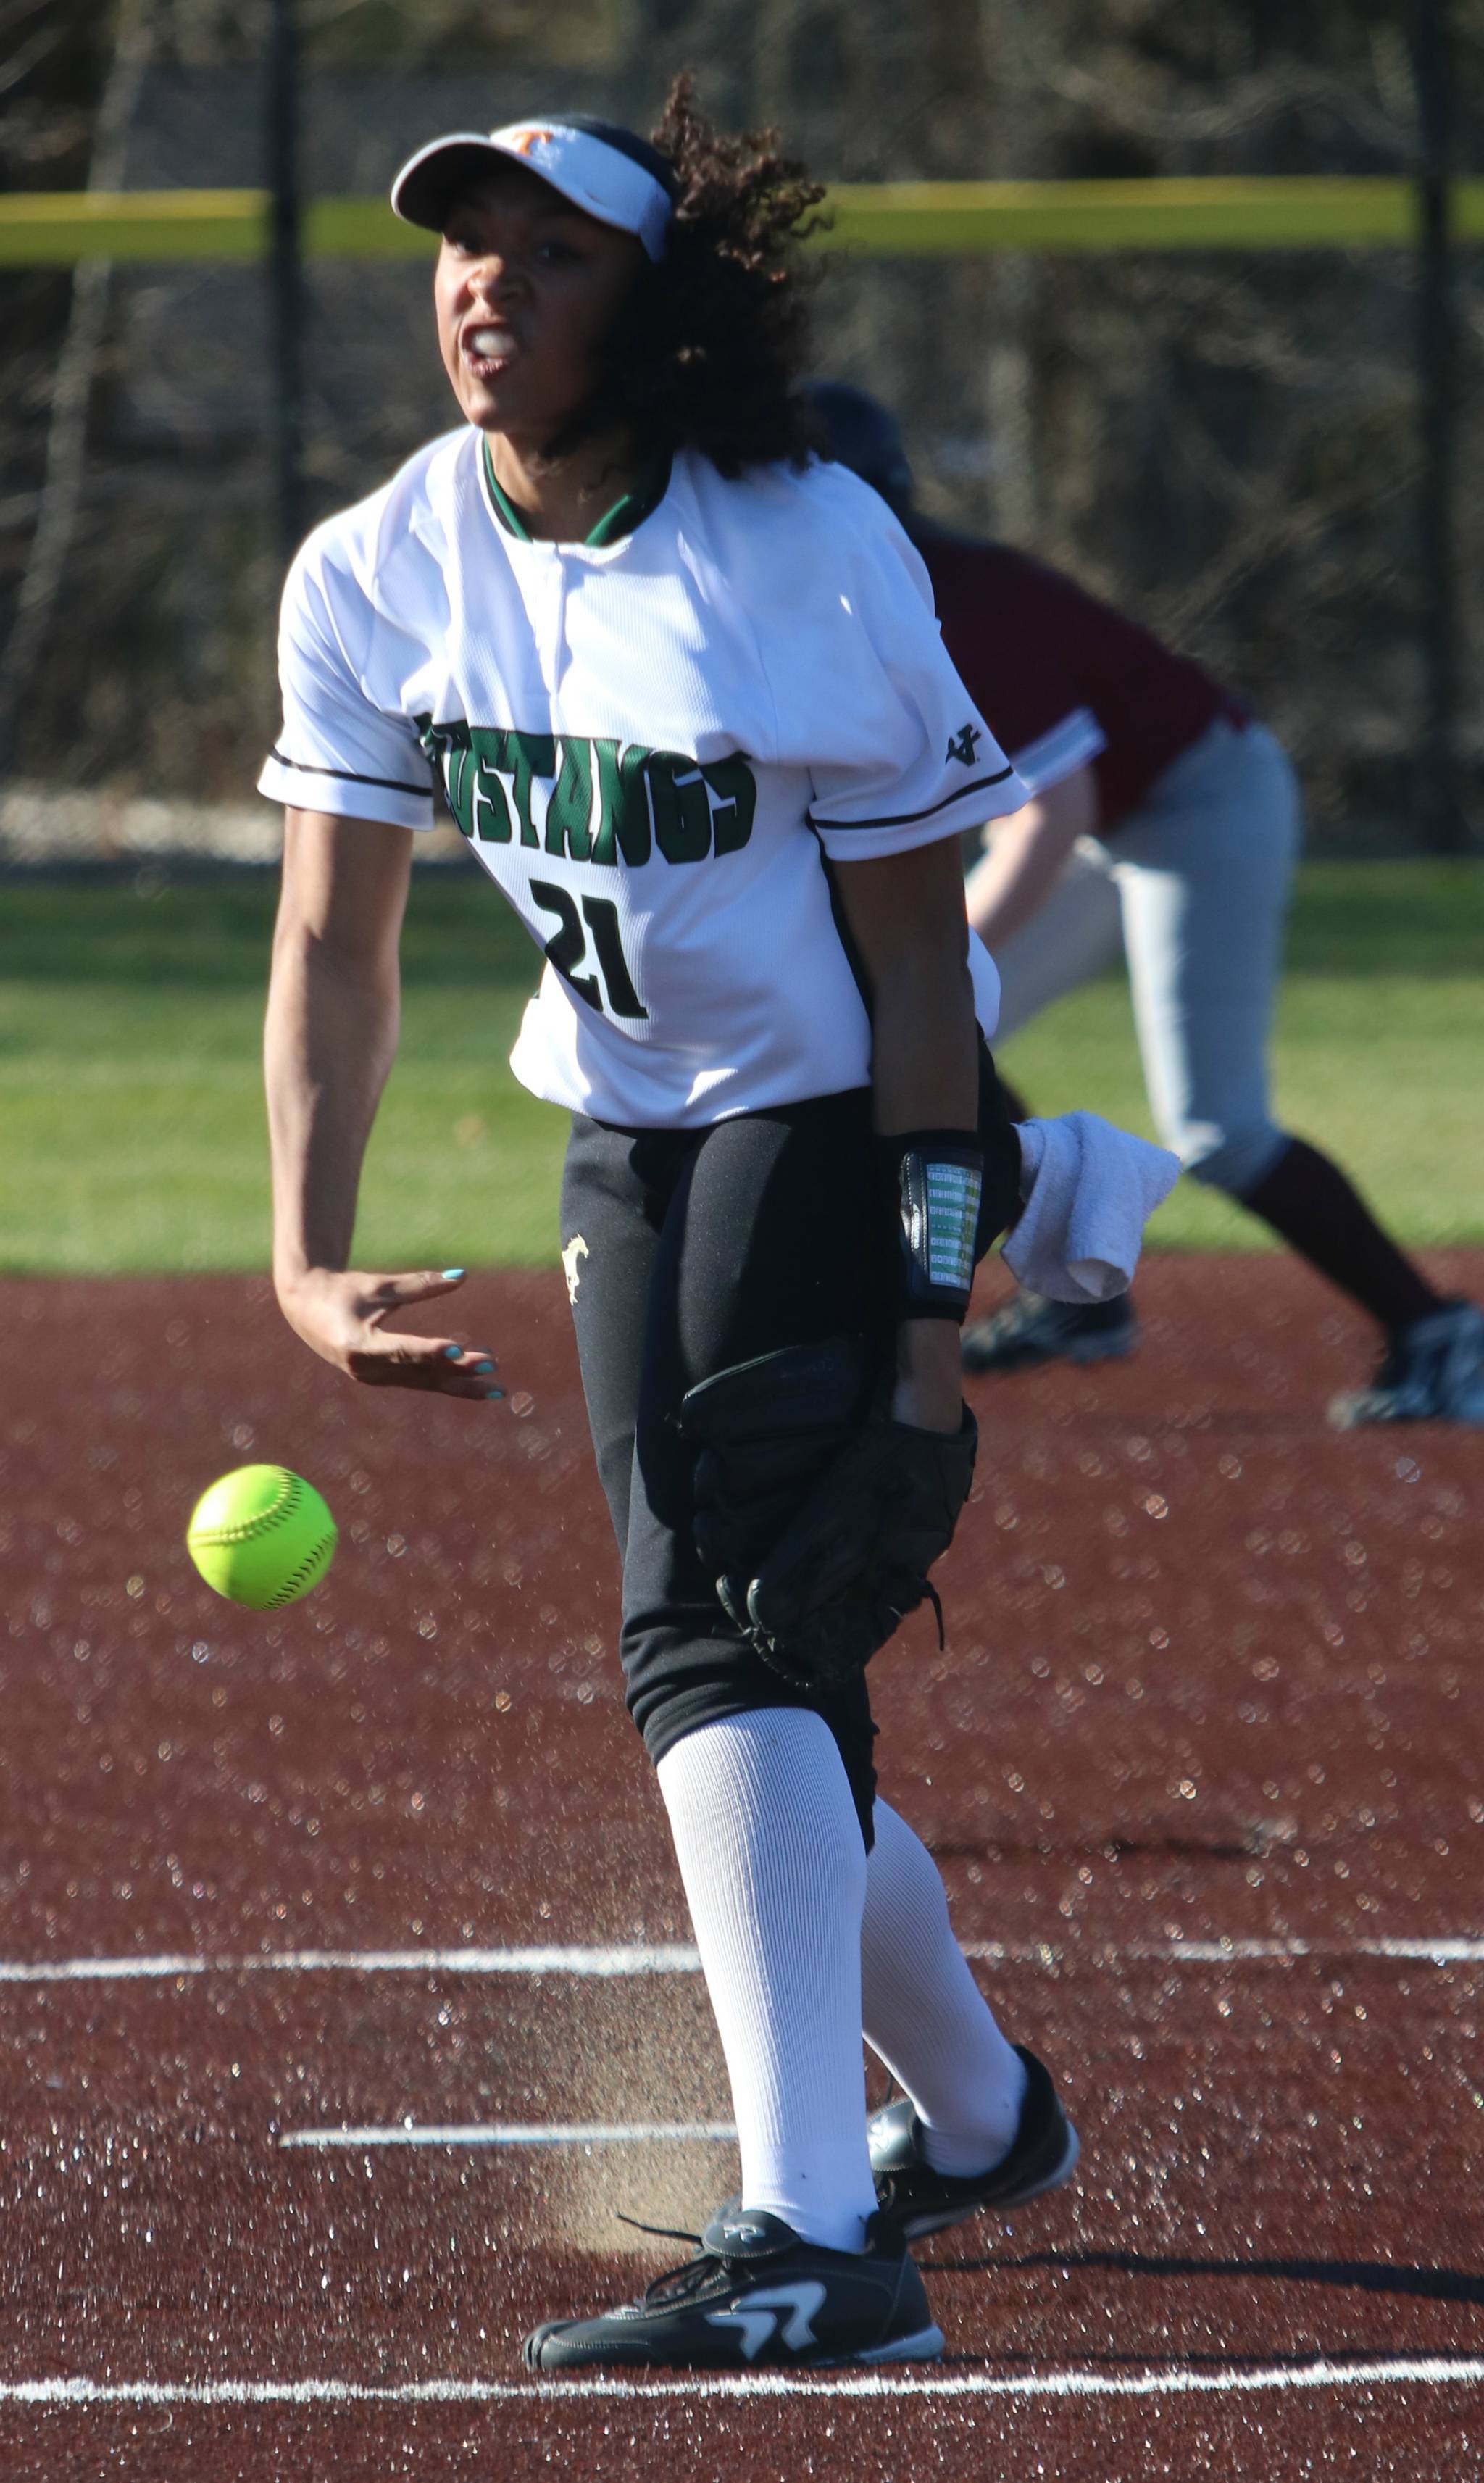 Redmond’s Kiki Milloy unleashes a pitch against Eastlake. Andy Nystrom / staff photo